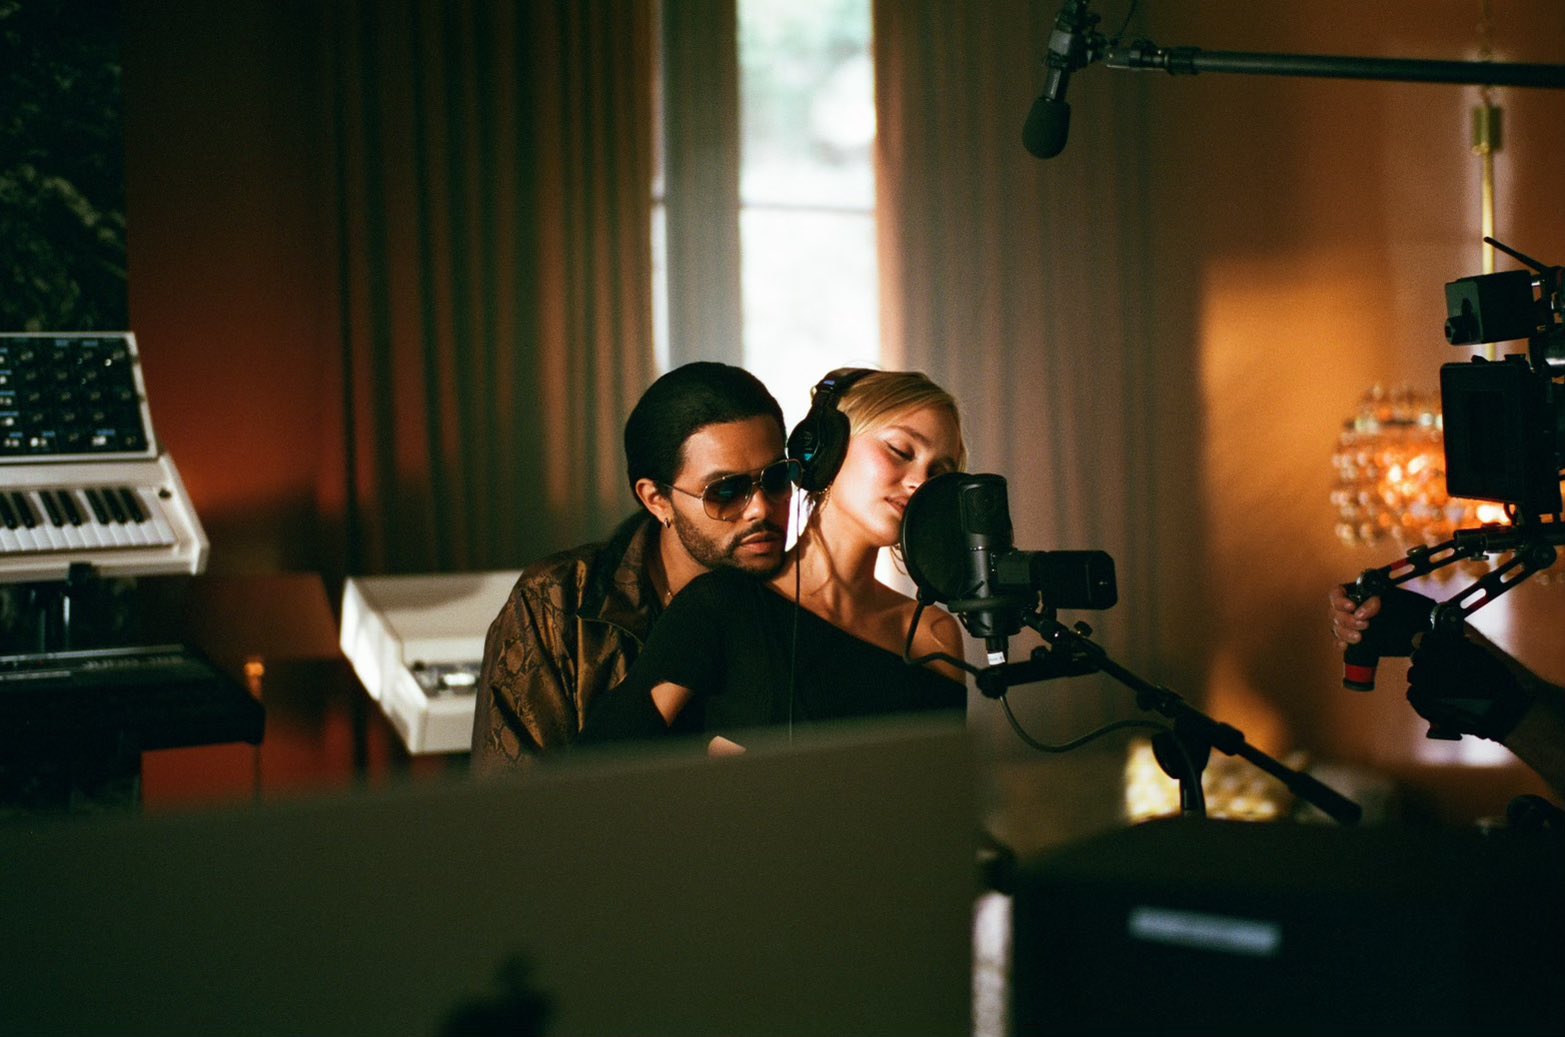 Lily-Rose Depp and The Weeknd in The Idol HBO series